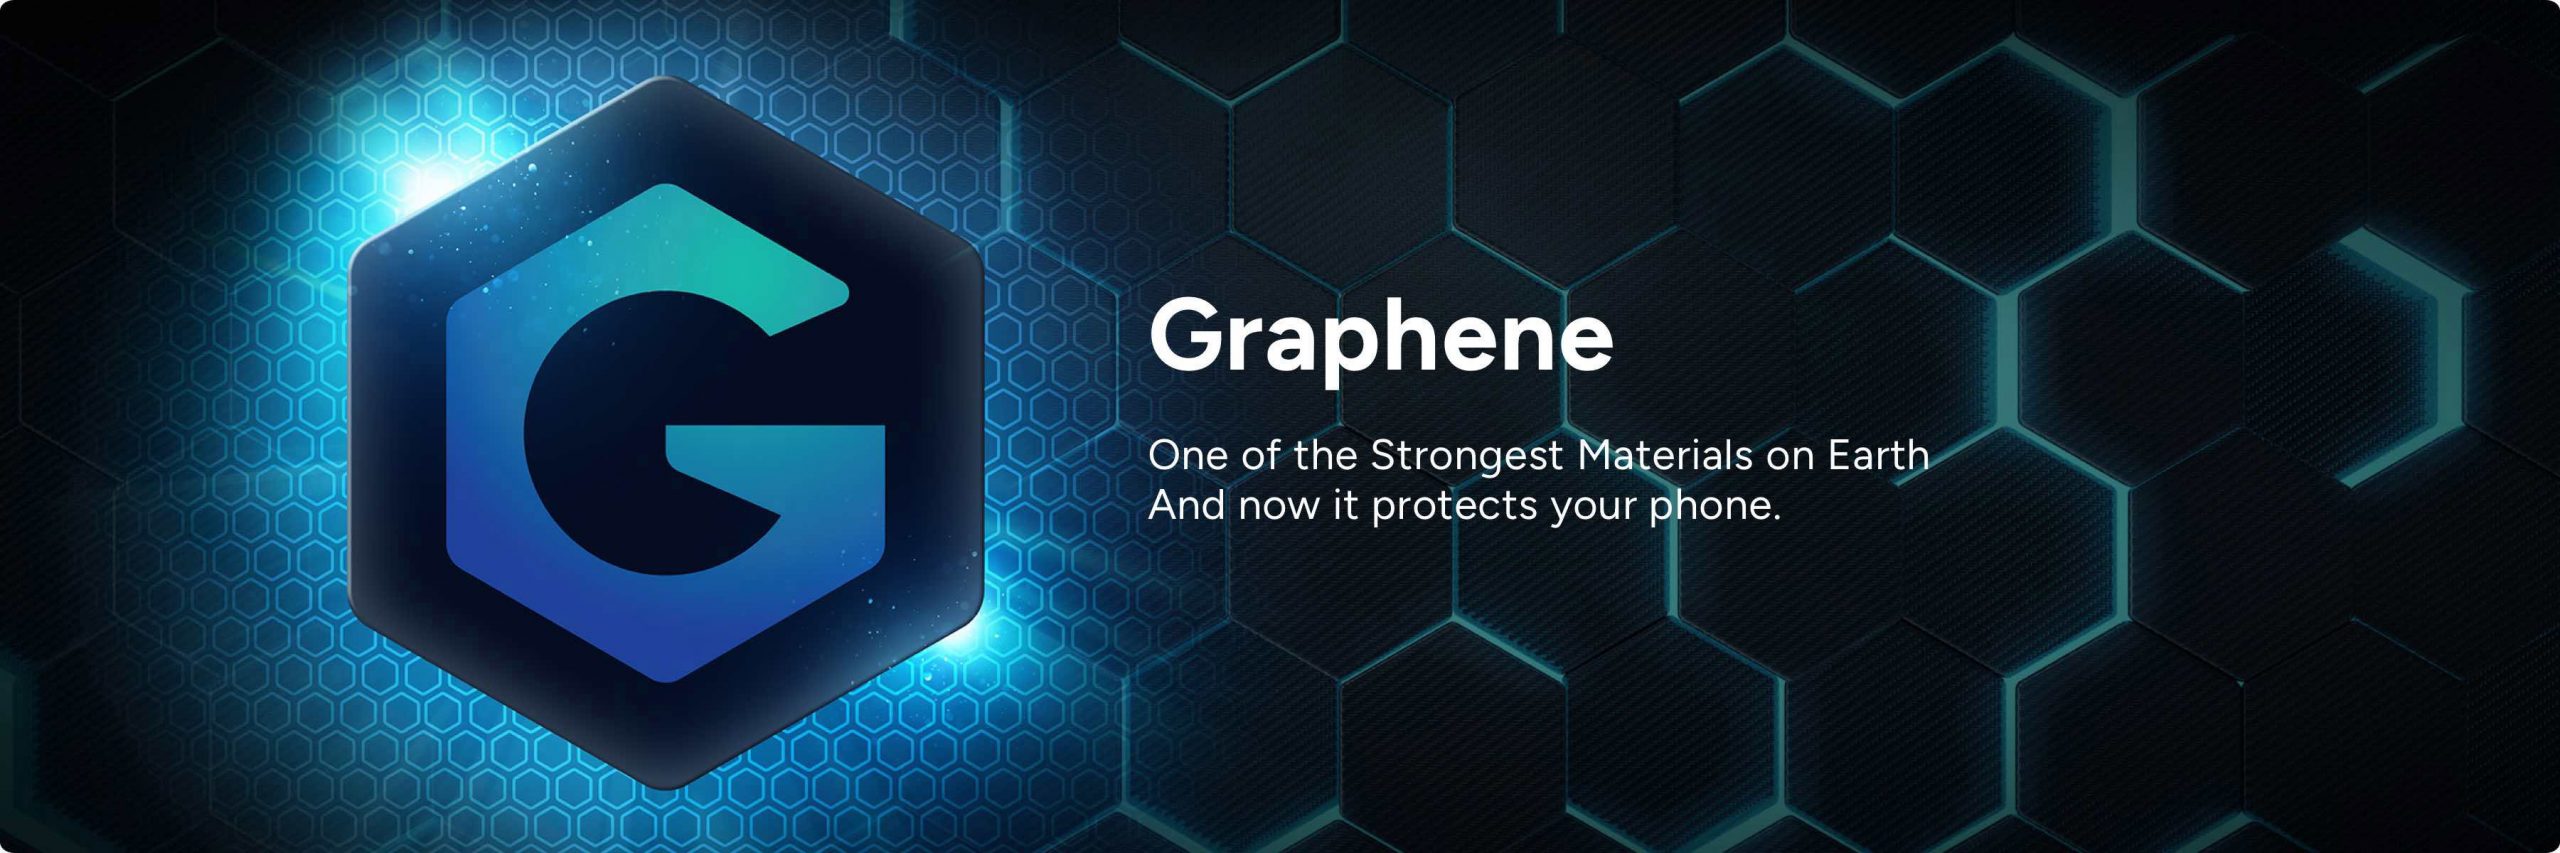 New material used by ZAGG-Graphene